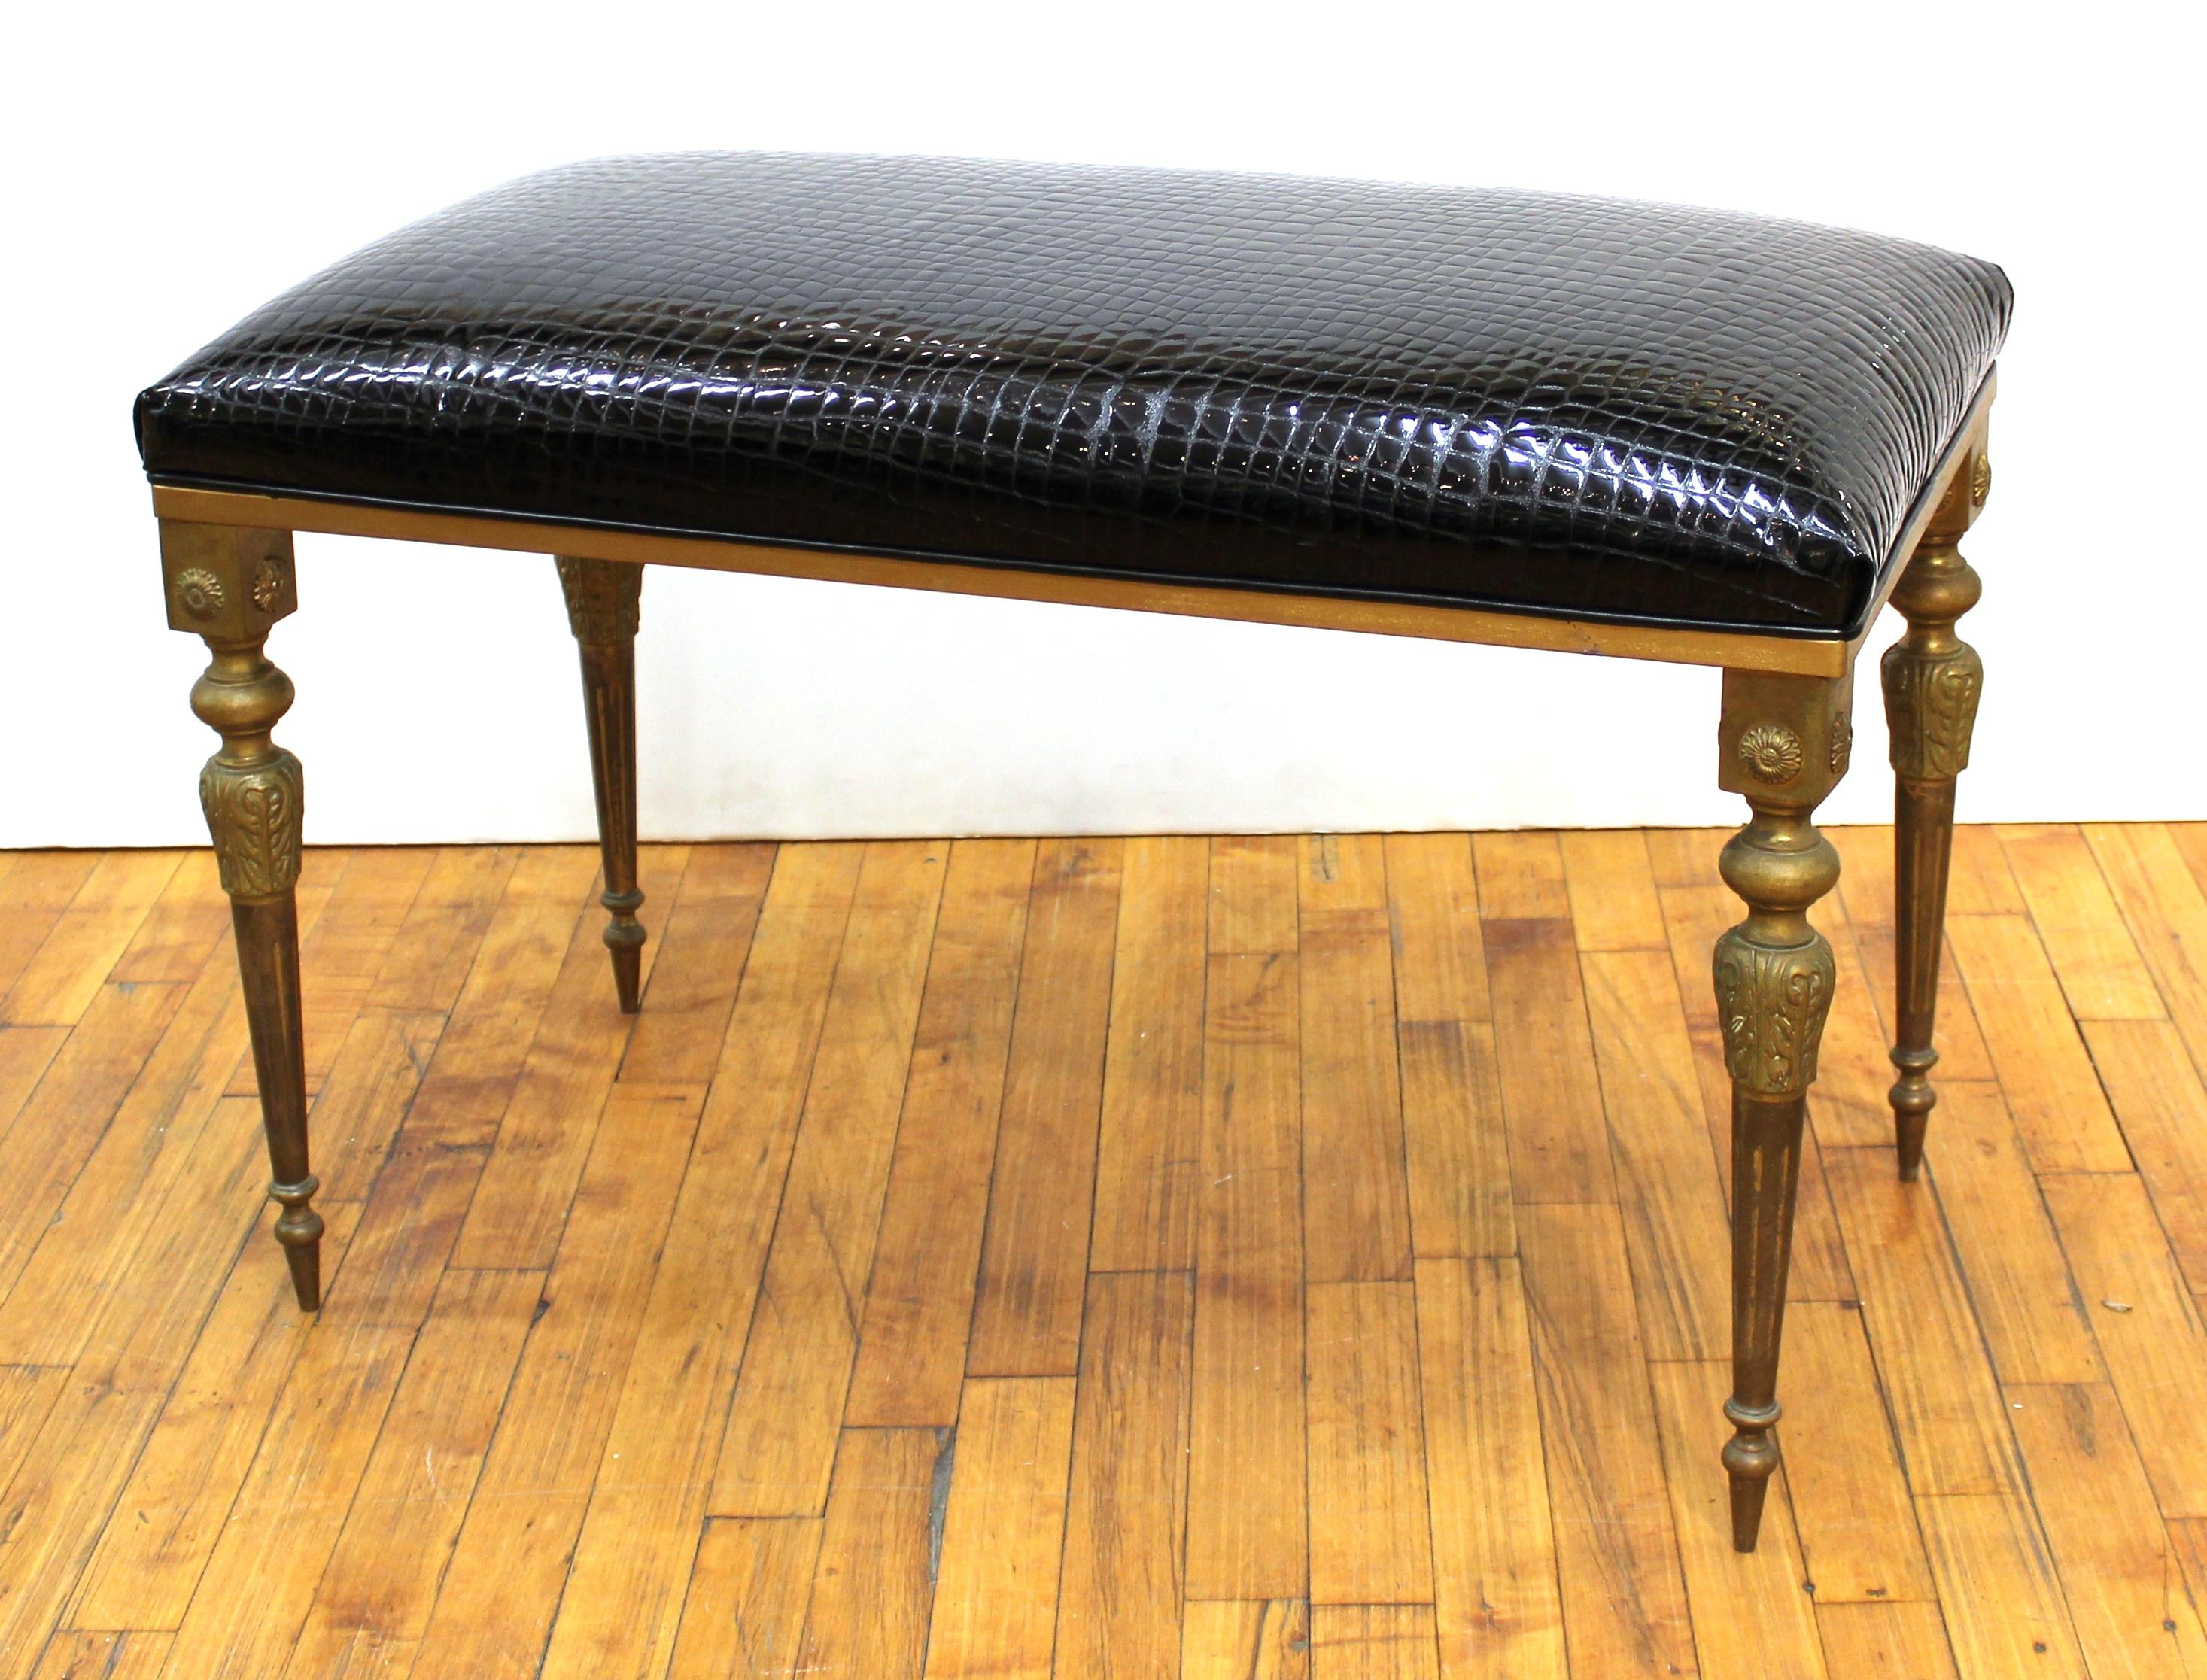 Mid-20th Century Italian Midcentury Bronze Bench with Faux Alligator Black Patent Leather